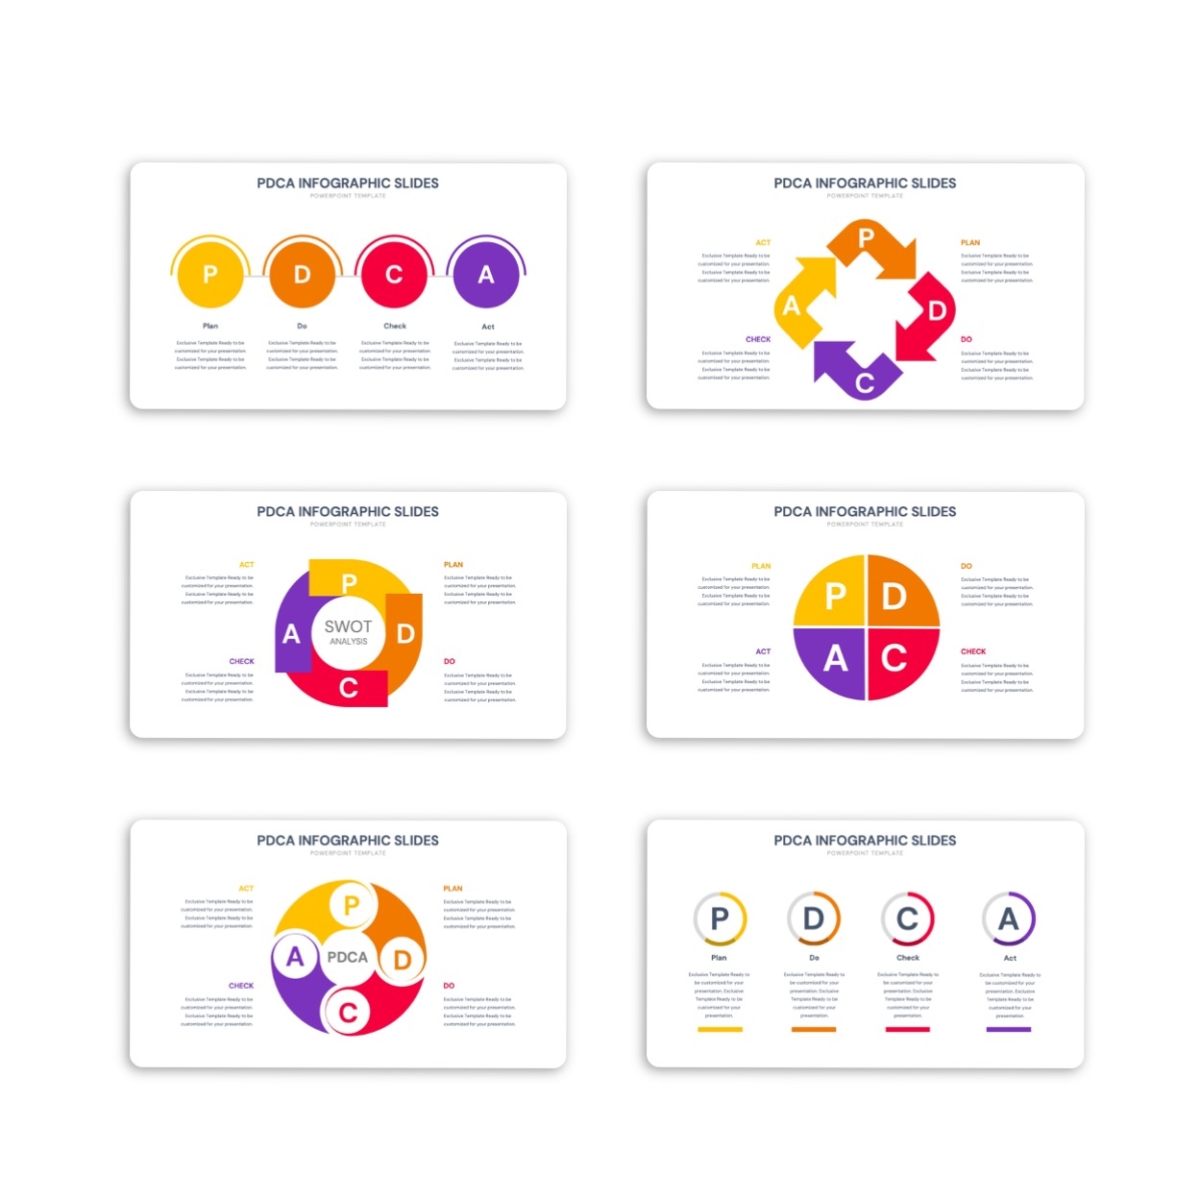 PDCA Infographic PowerPoint Template